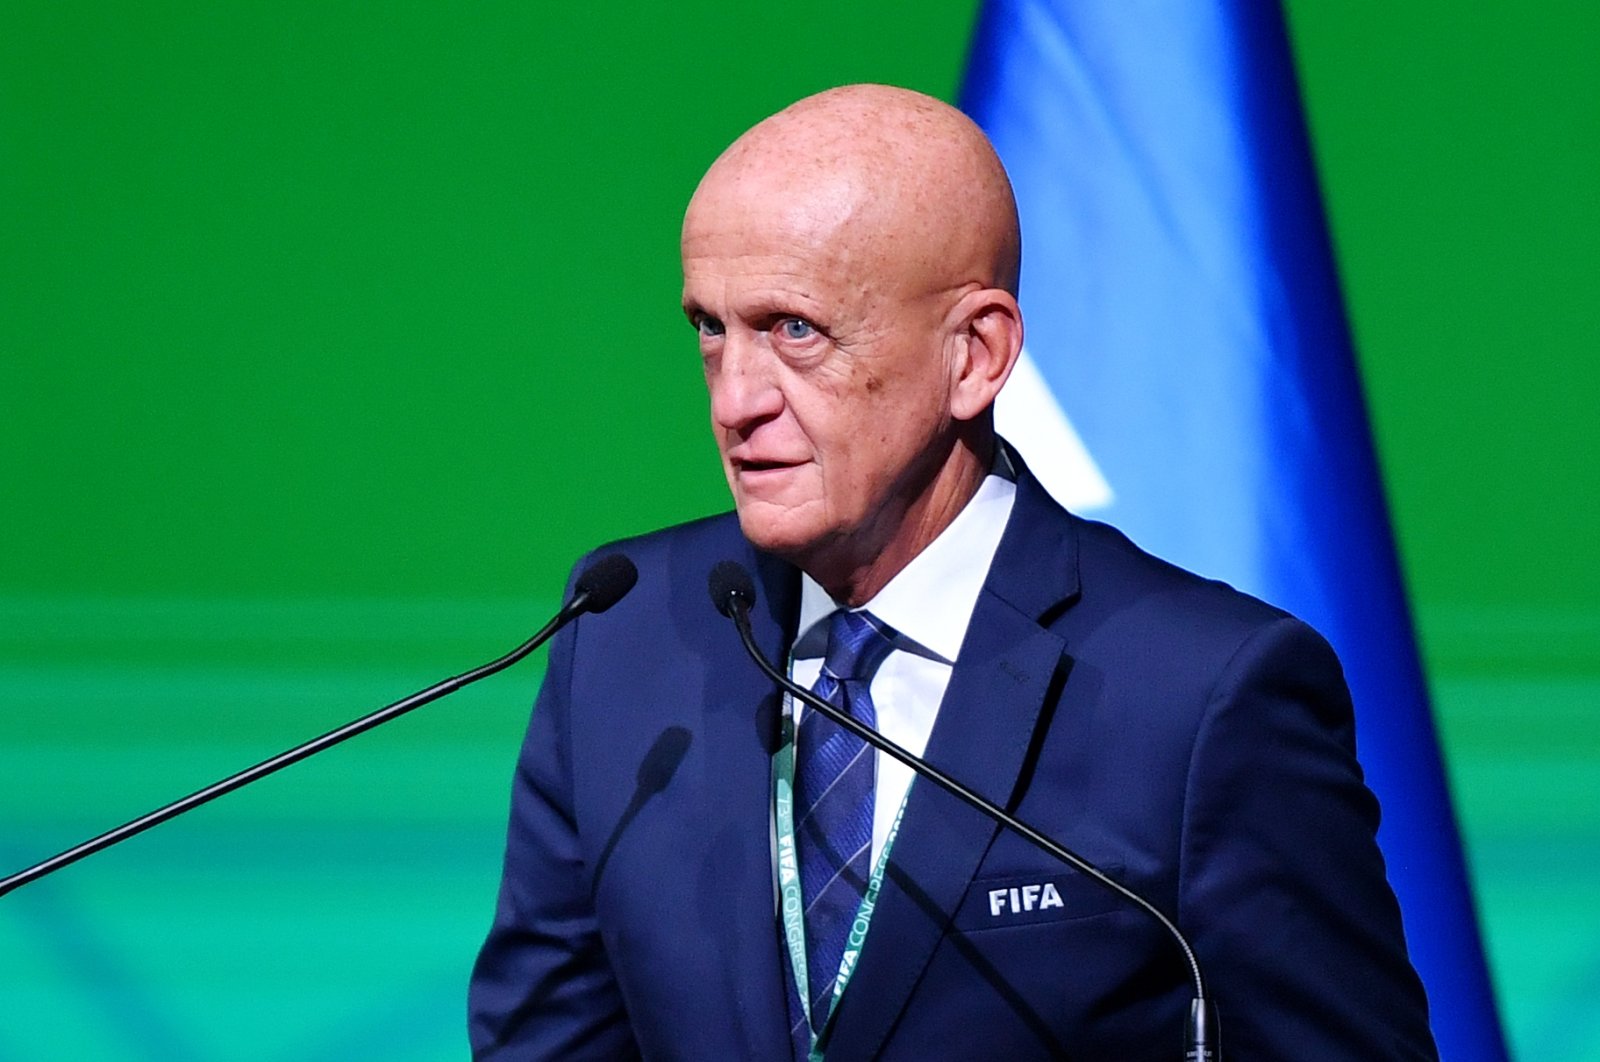 Attacks on referees could kill football: Top FIFA official Collina